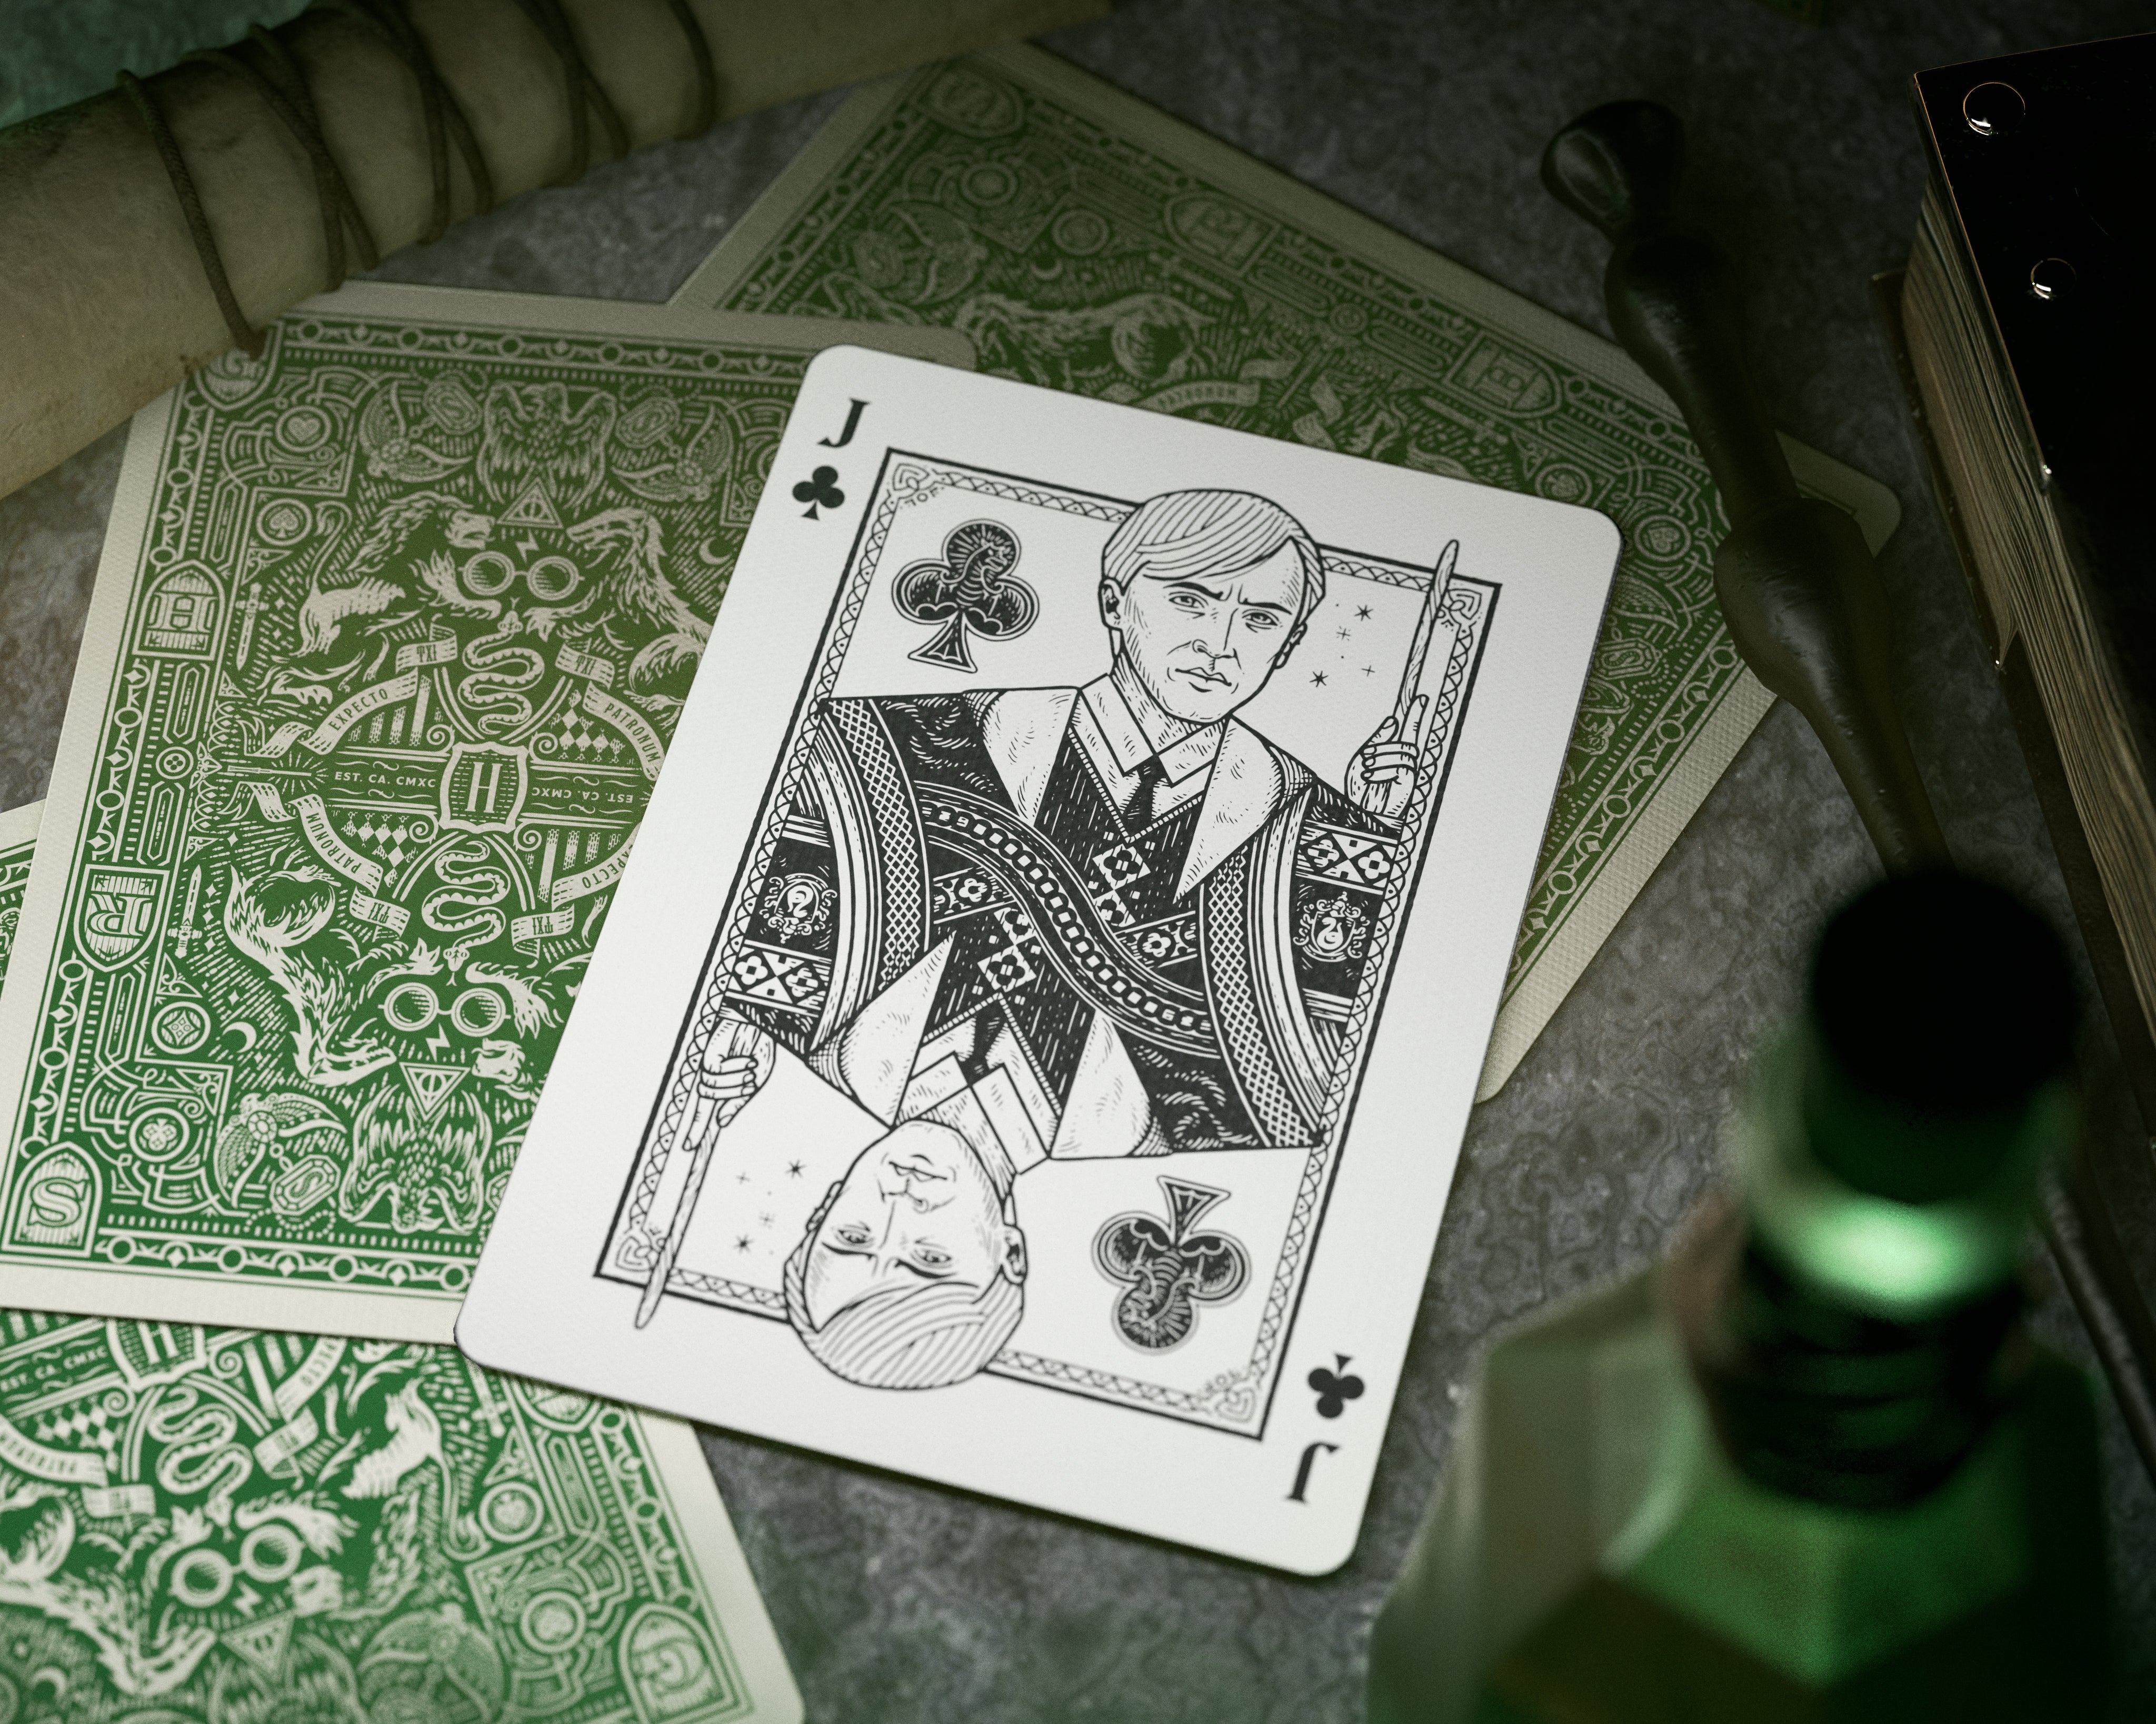 Harry Potter Playing Cards | theory11